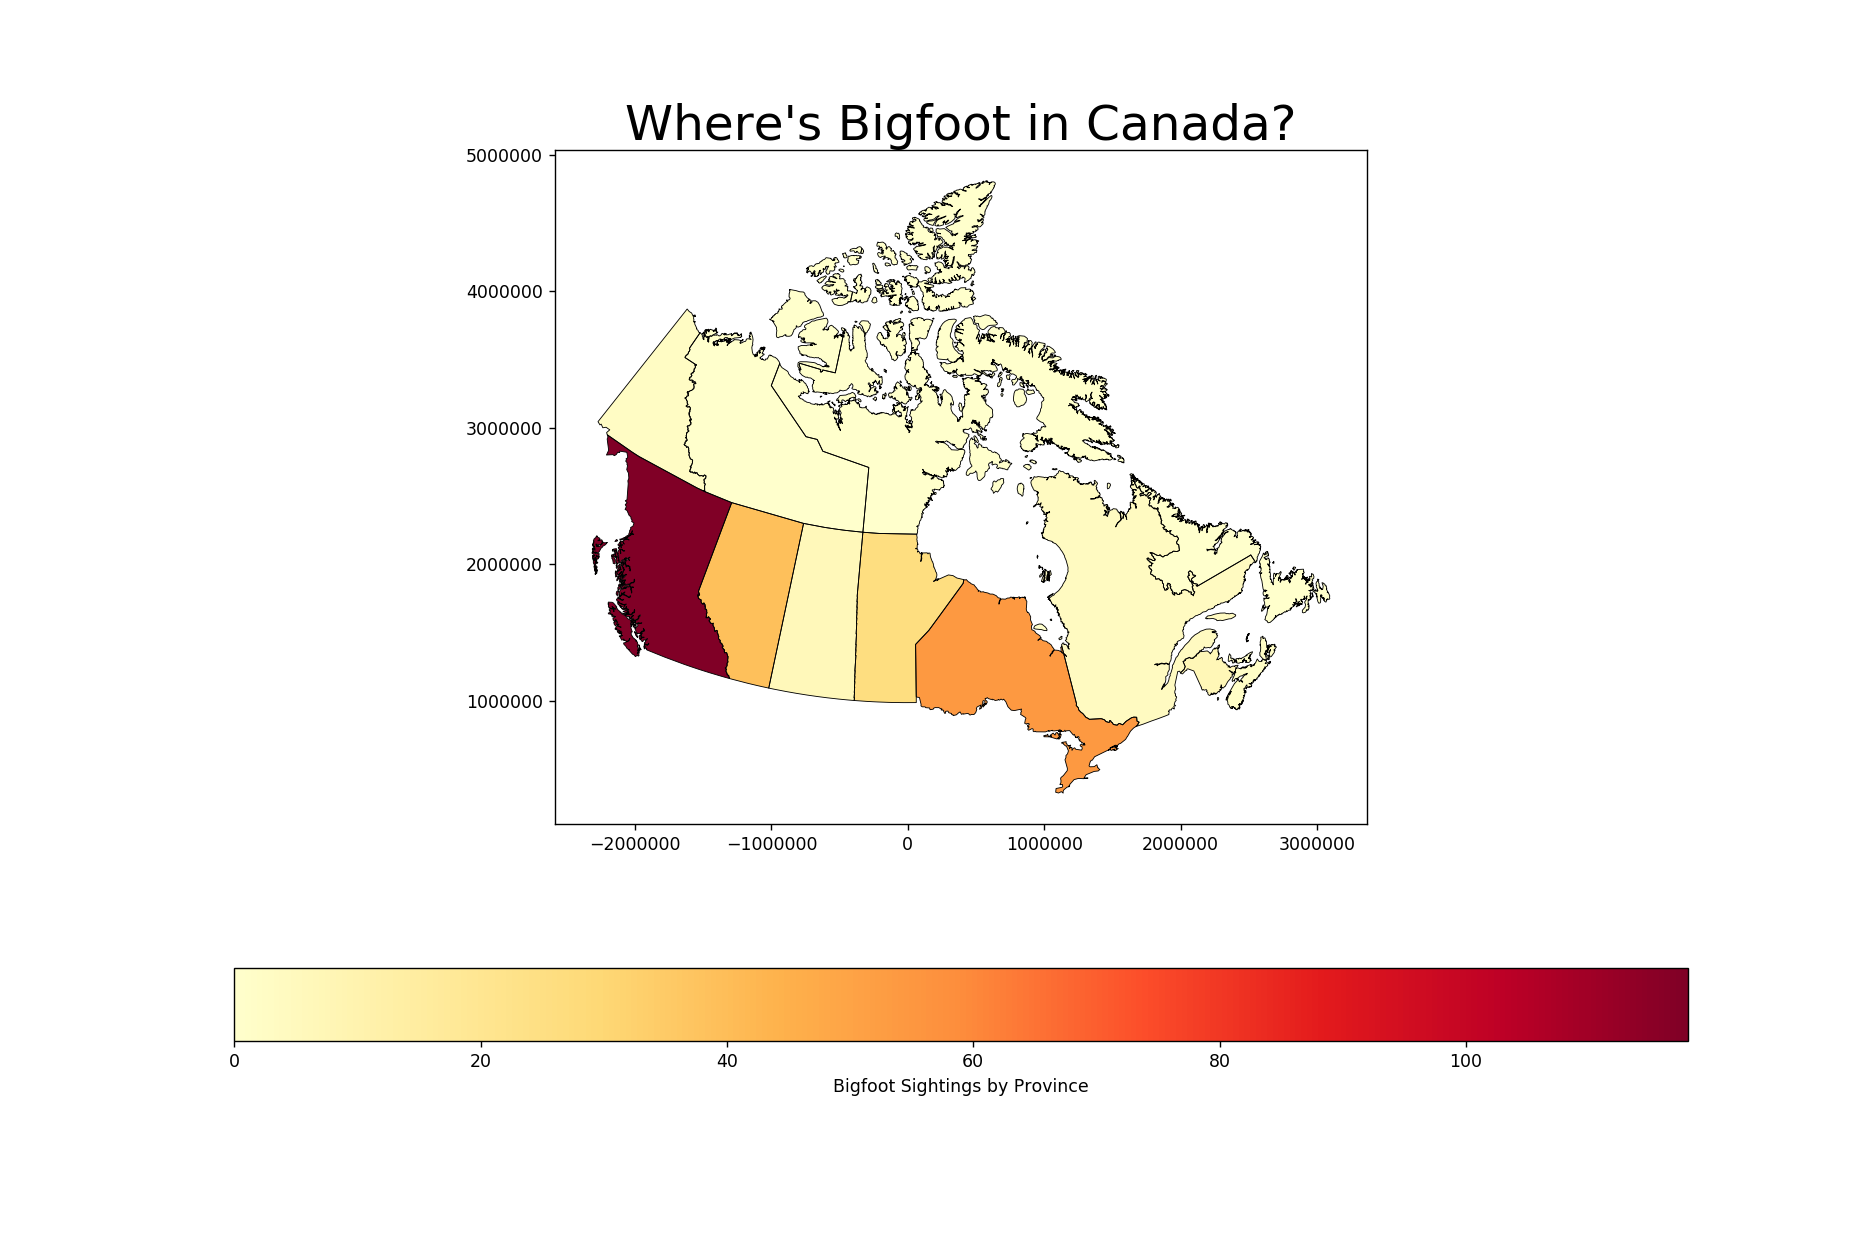 sighting_map_canada.png